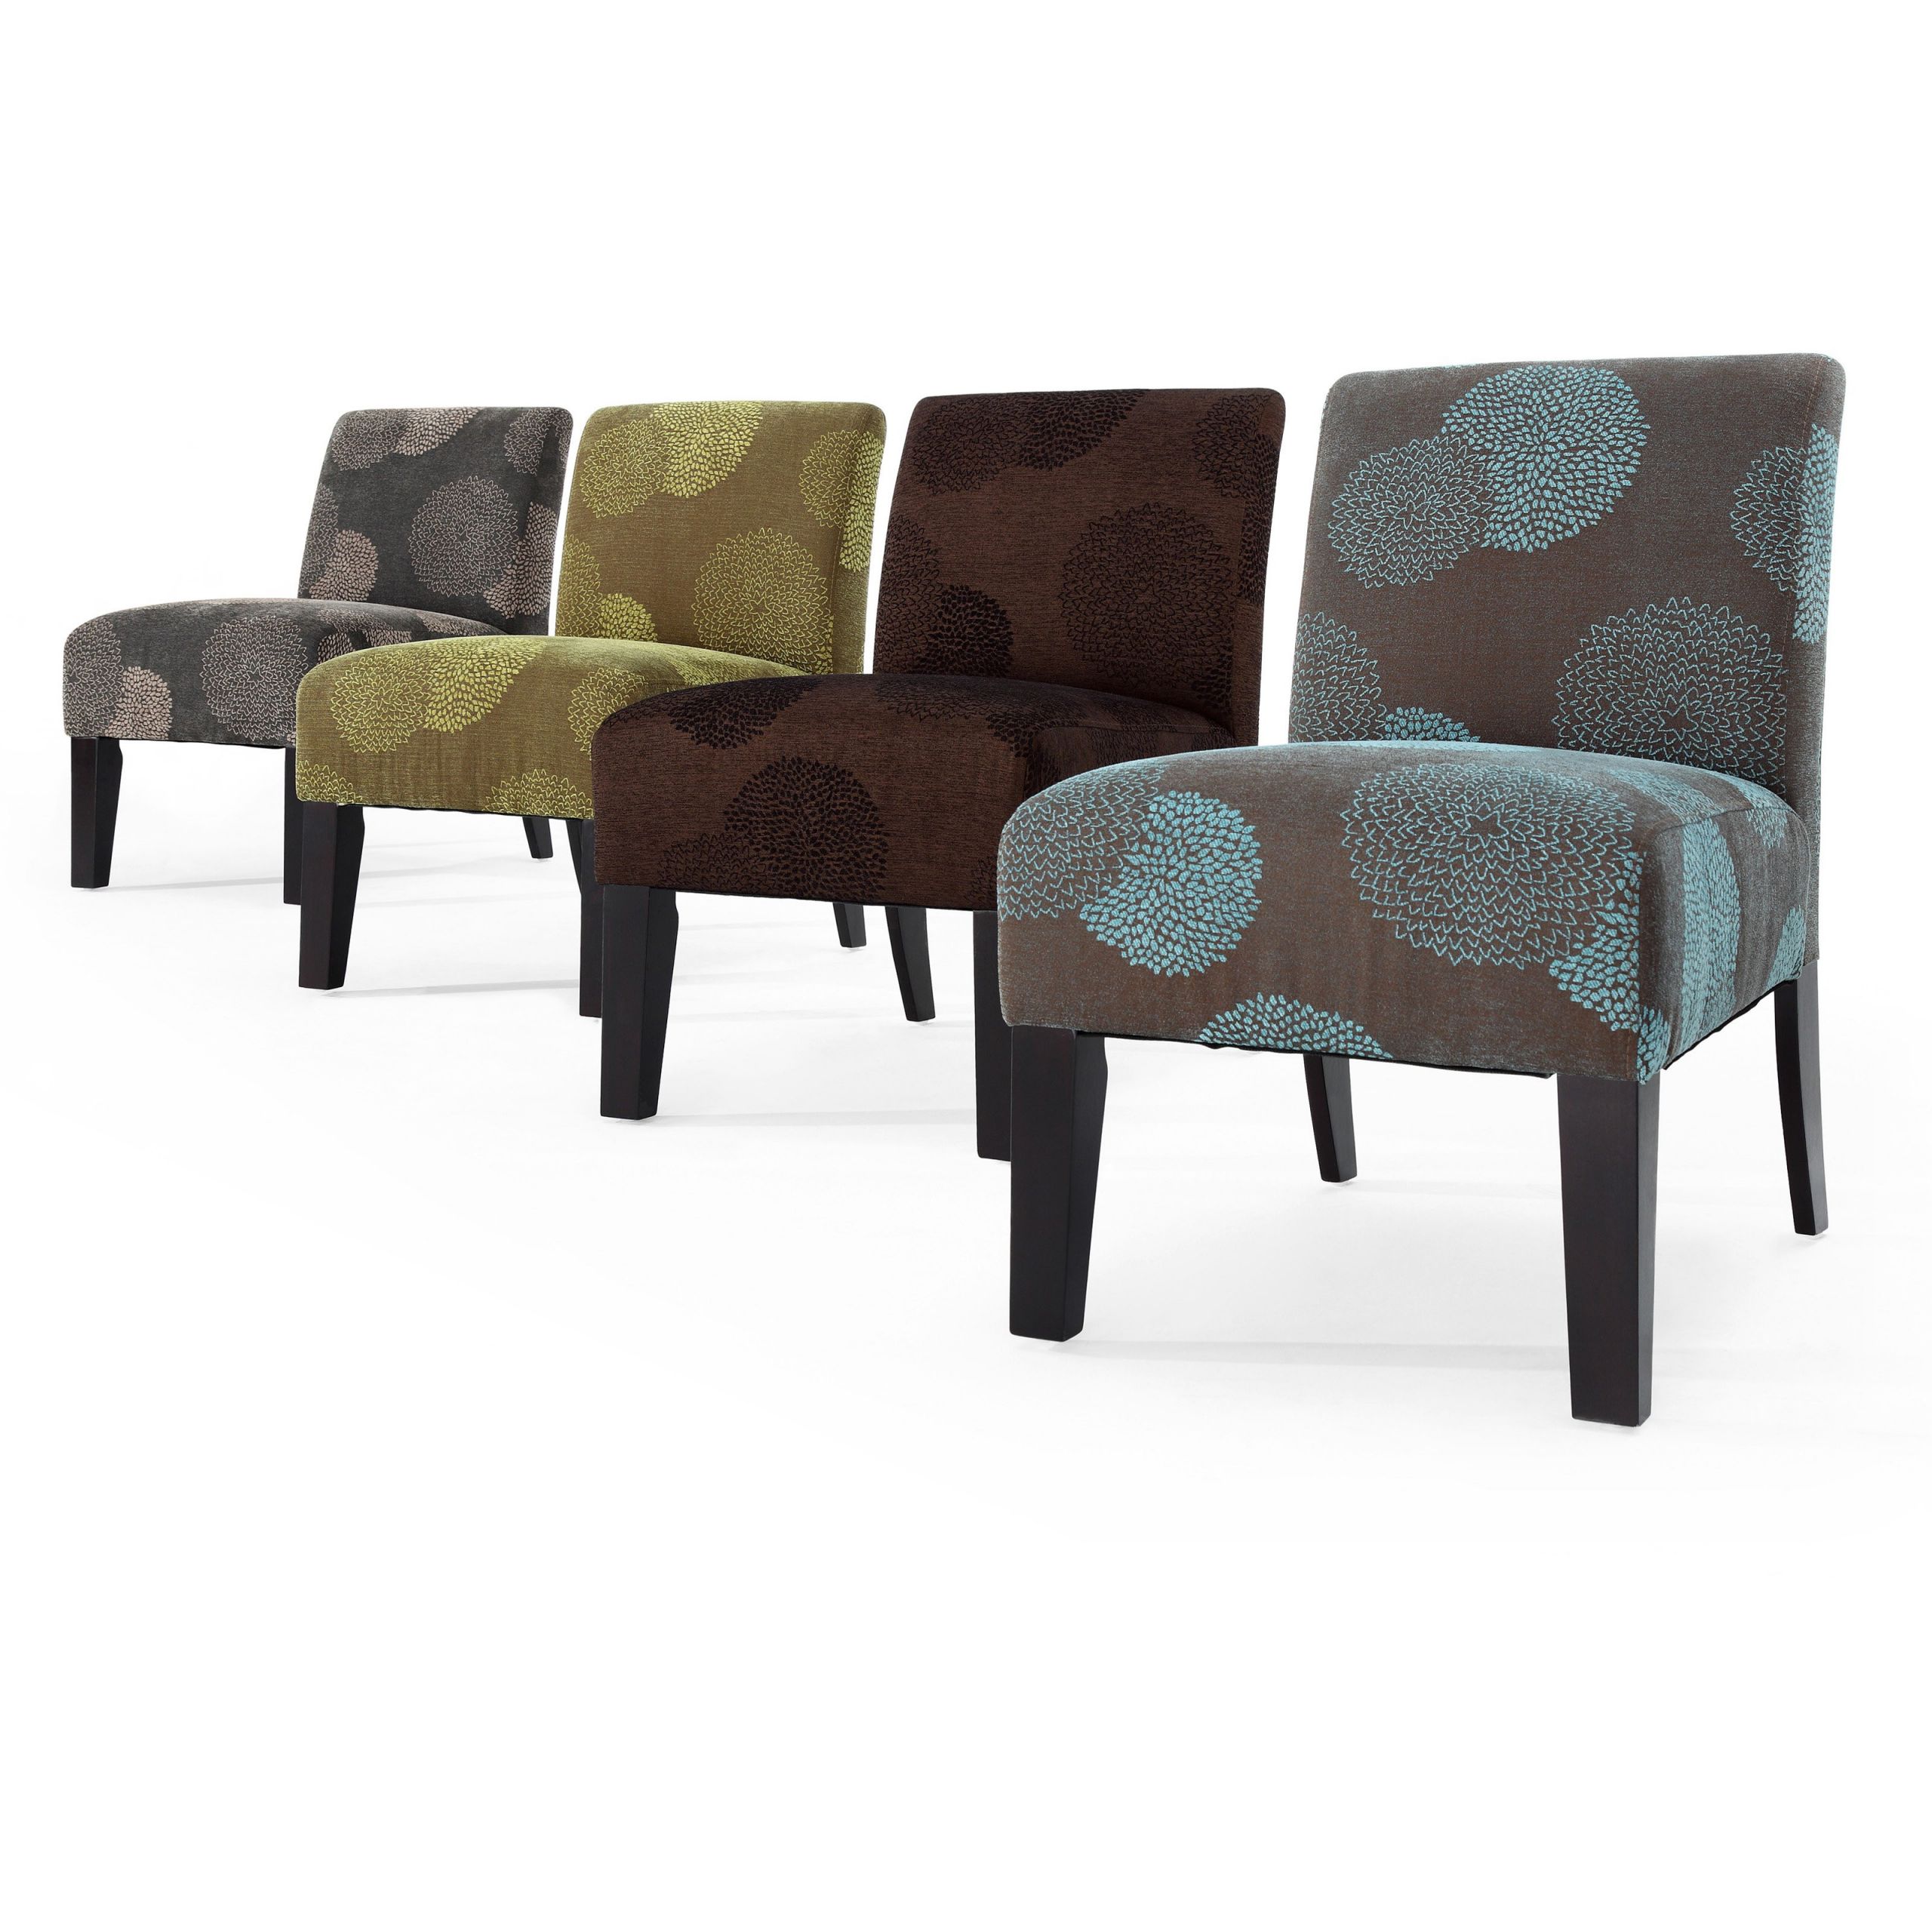 Armless Living Room Chairs
 Furniture Armless Accent Chair For An Exceptionally